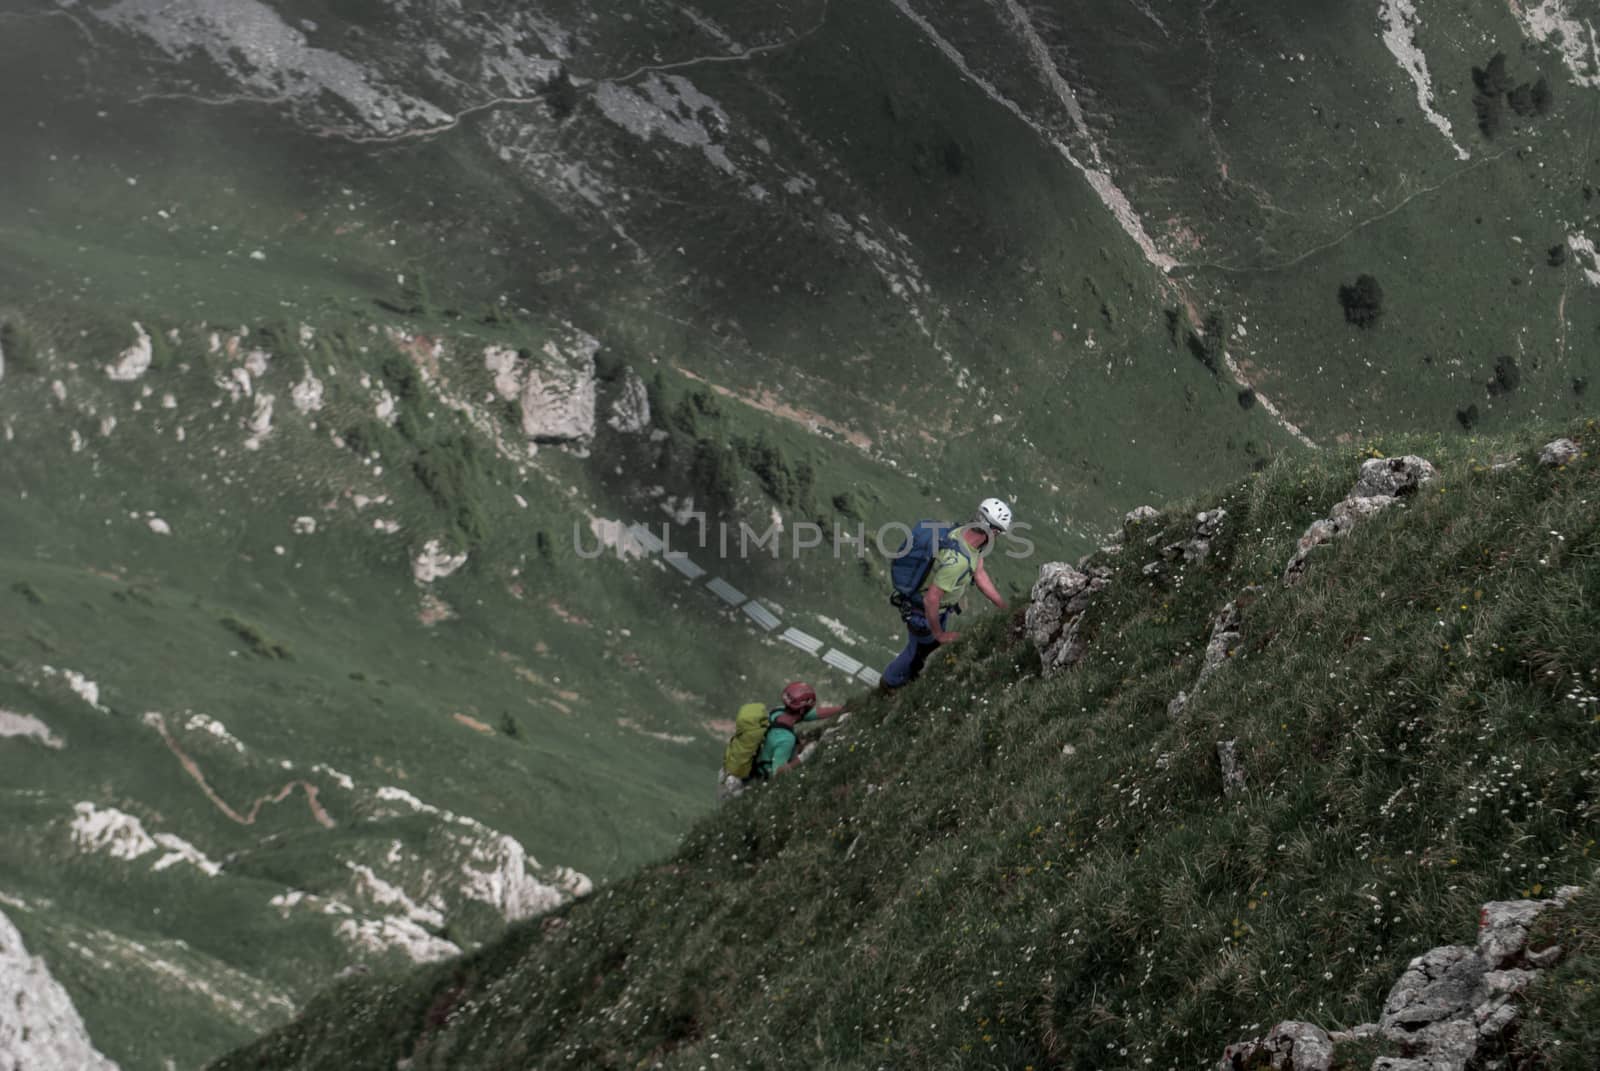 Two brave climbers attacking the mountainside